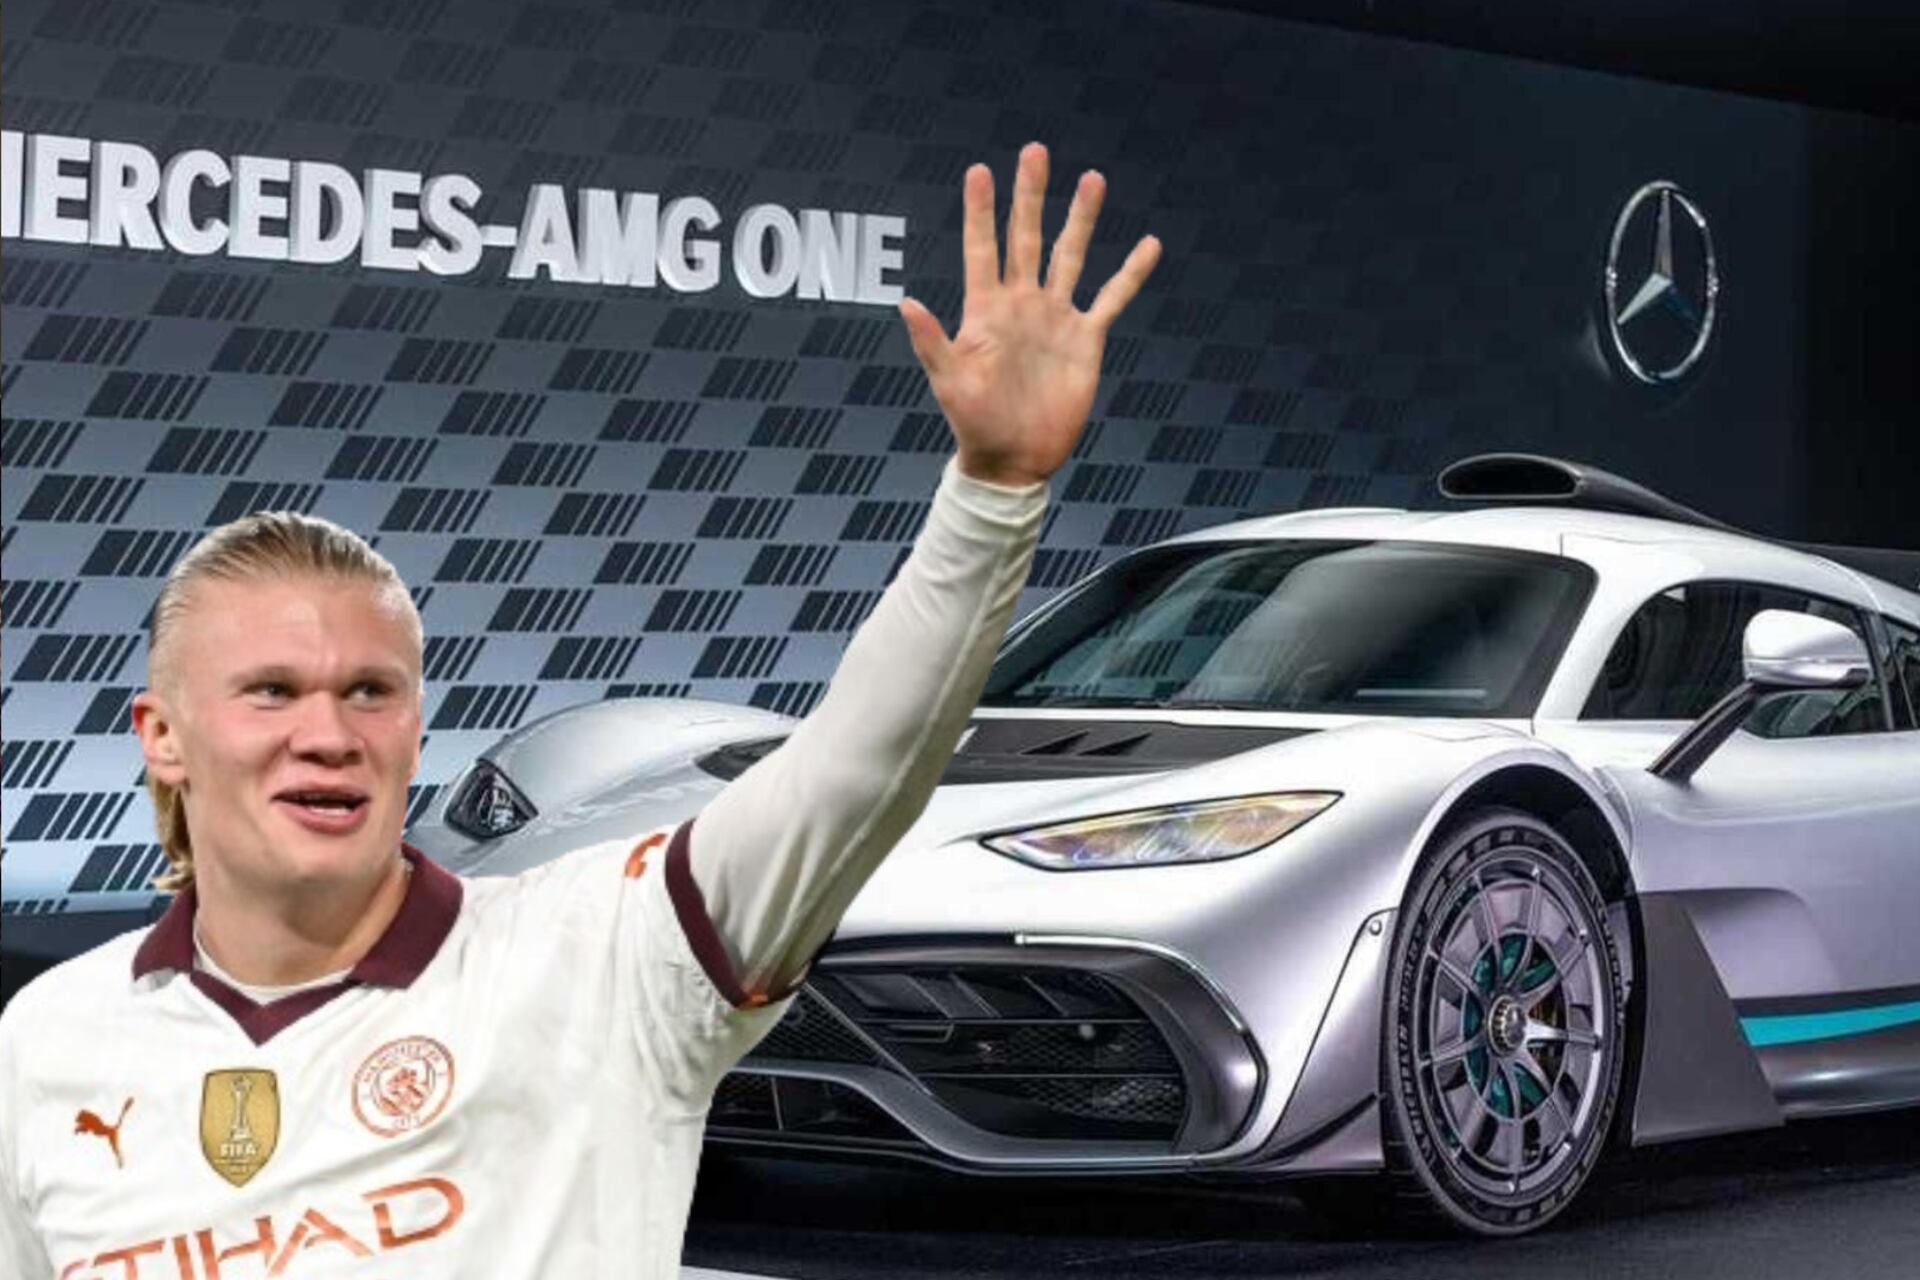 Man City Haaland's party goes on, know the Mercedes he'll buy to fest his goals